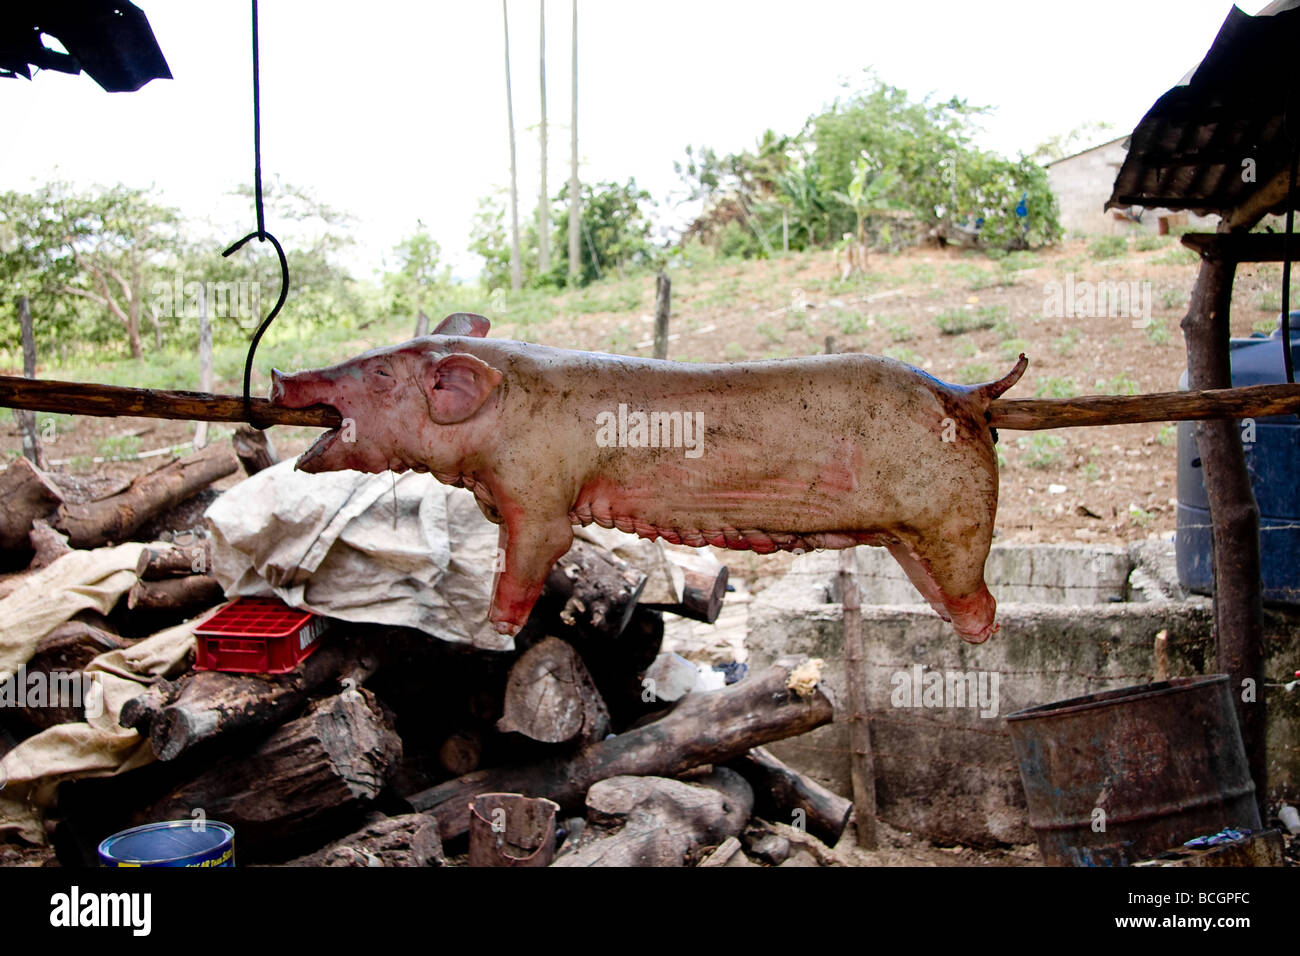 A young pig on a spit roast waiting to be cooked near La Vega Dominican Republic Stock Photo